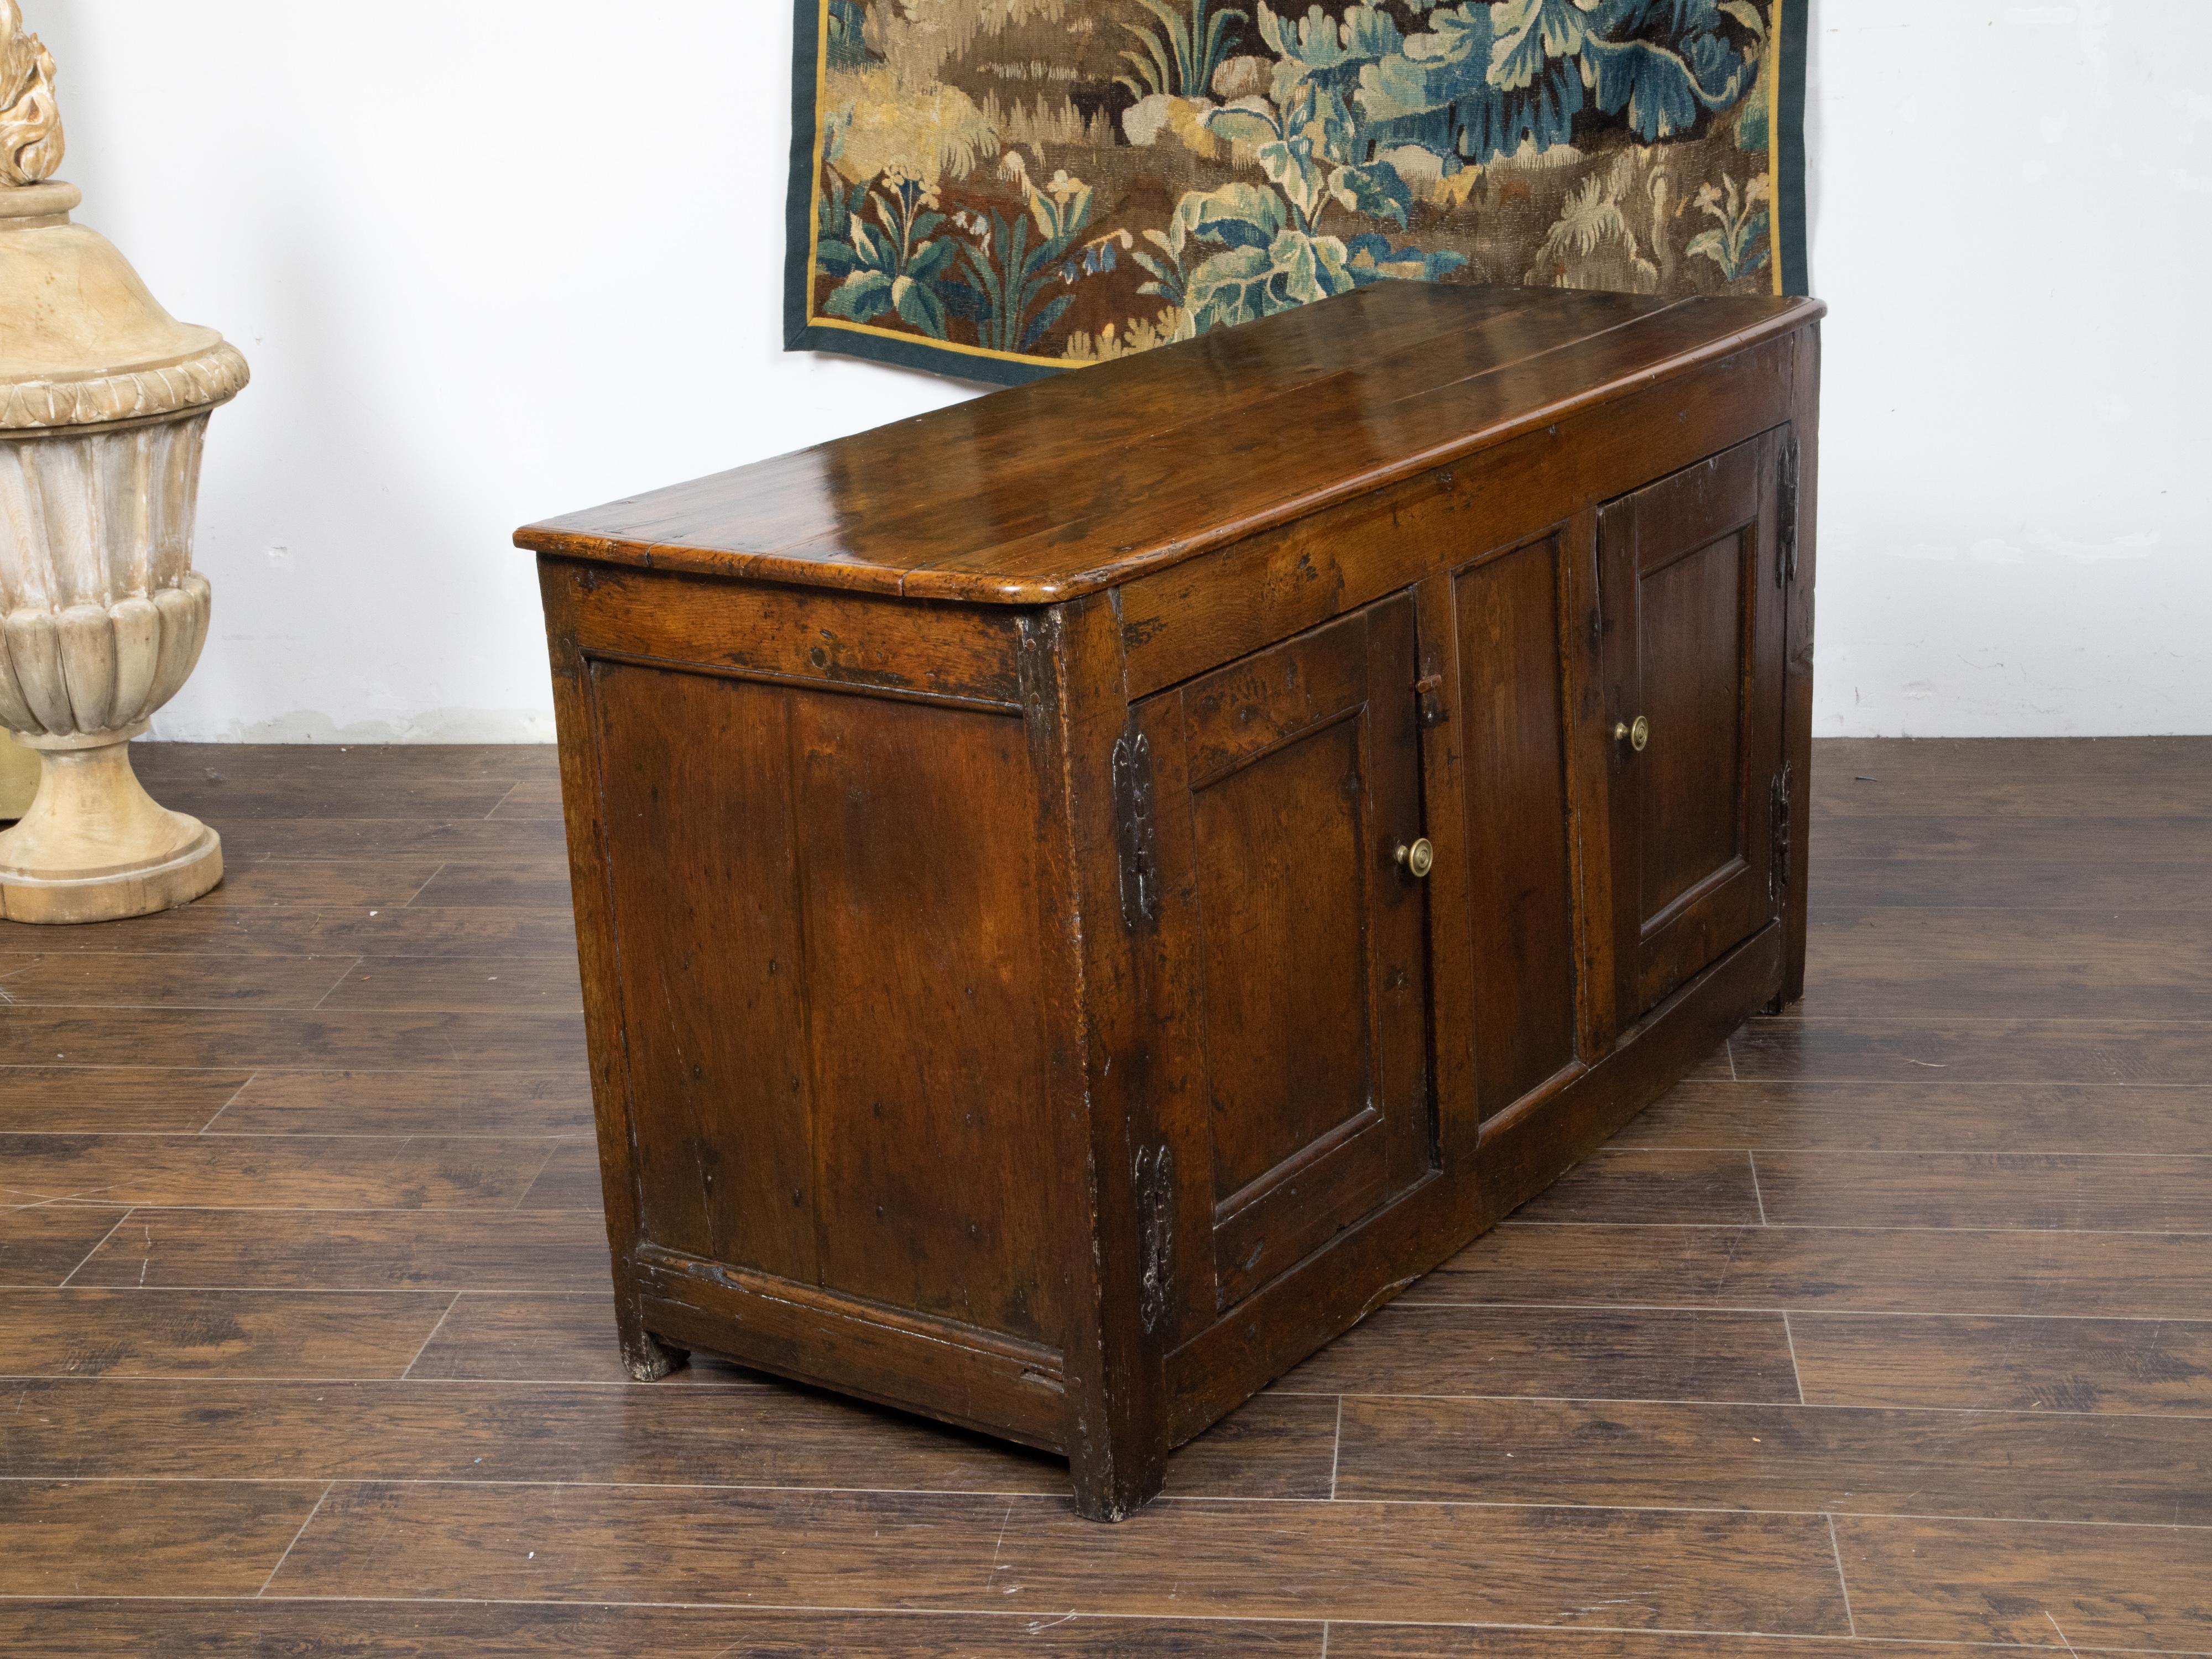 An English Georgian period elm buffet from the 18th century with two doors, recessed panels, iron and brass hardware and nicely weathered patina. Created in England during the early Georgian period in the 18h century, this elm buffet features a